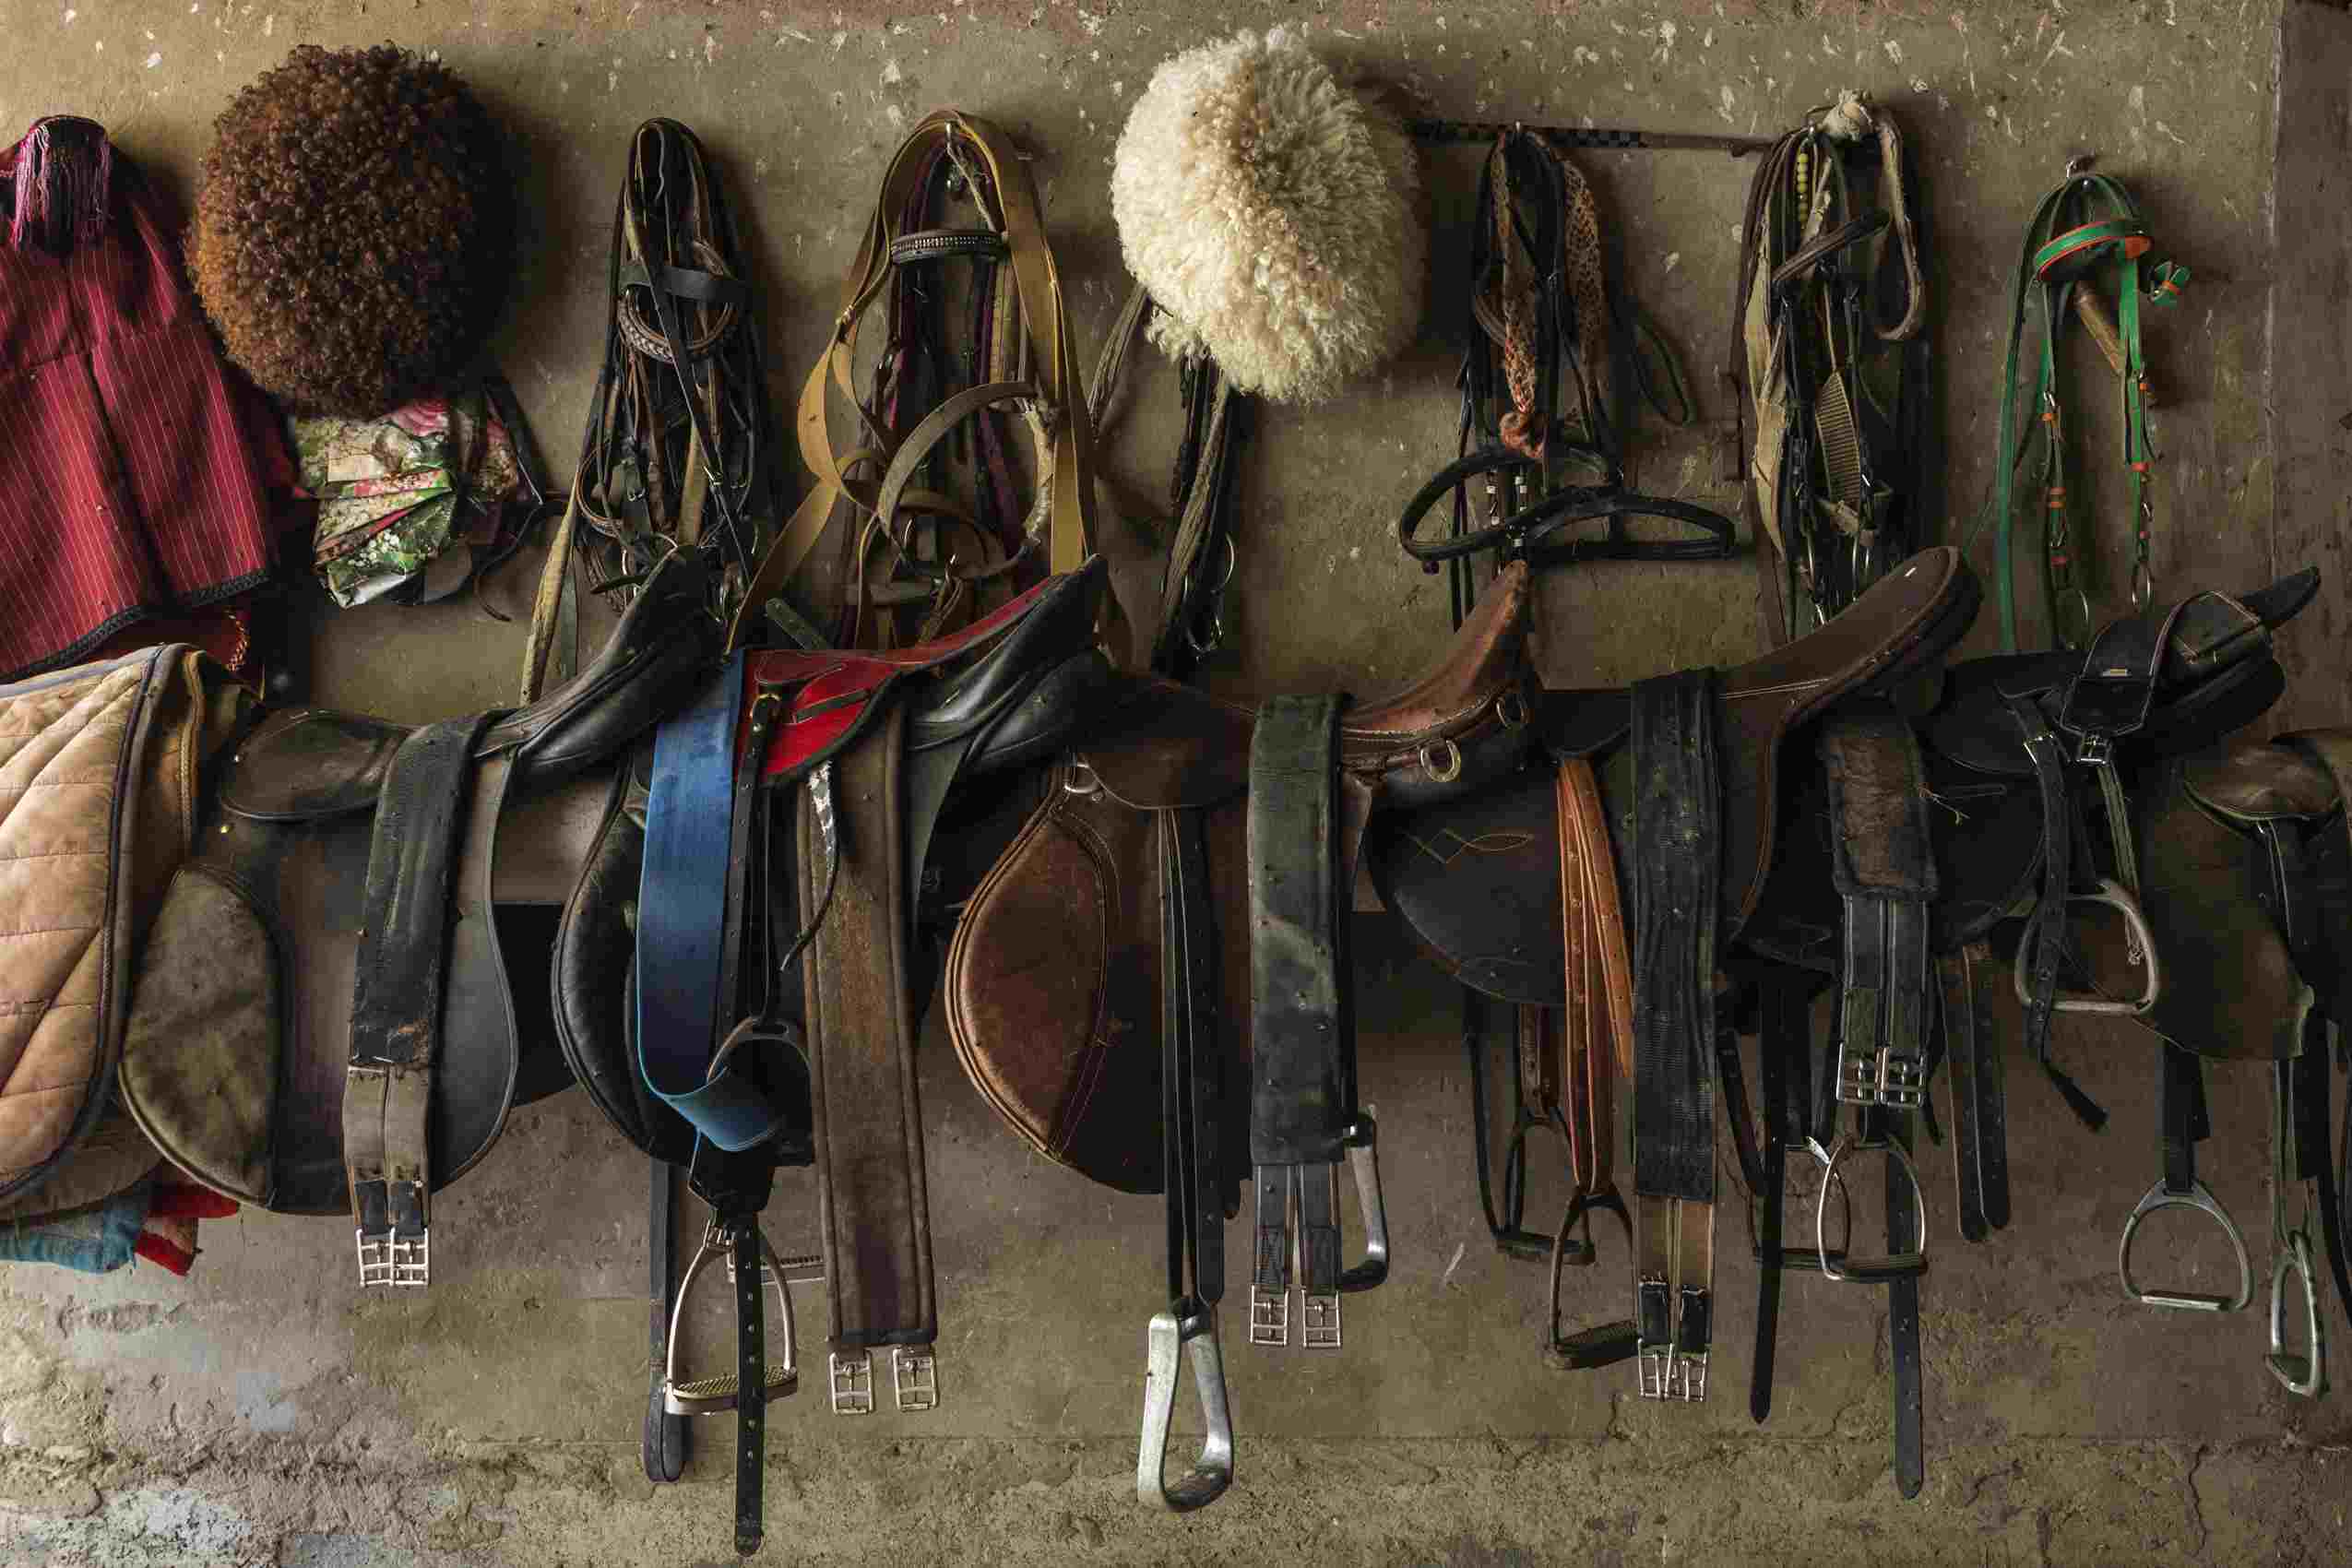 Equestrian gear hanging up on a wall.